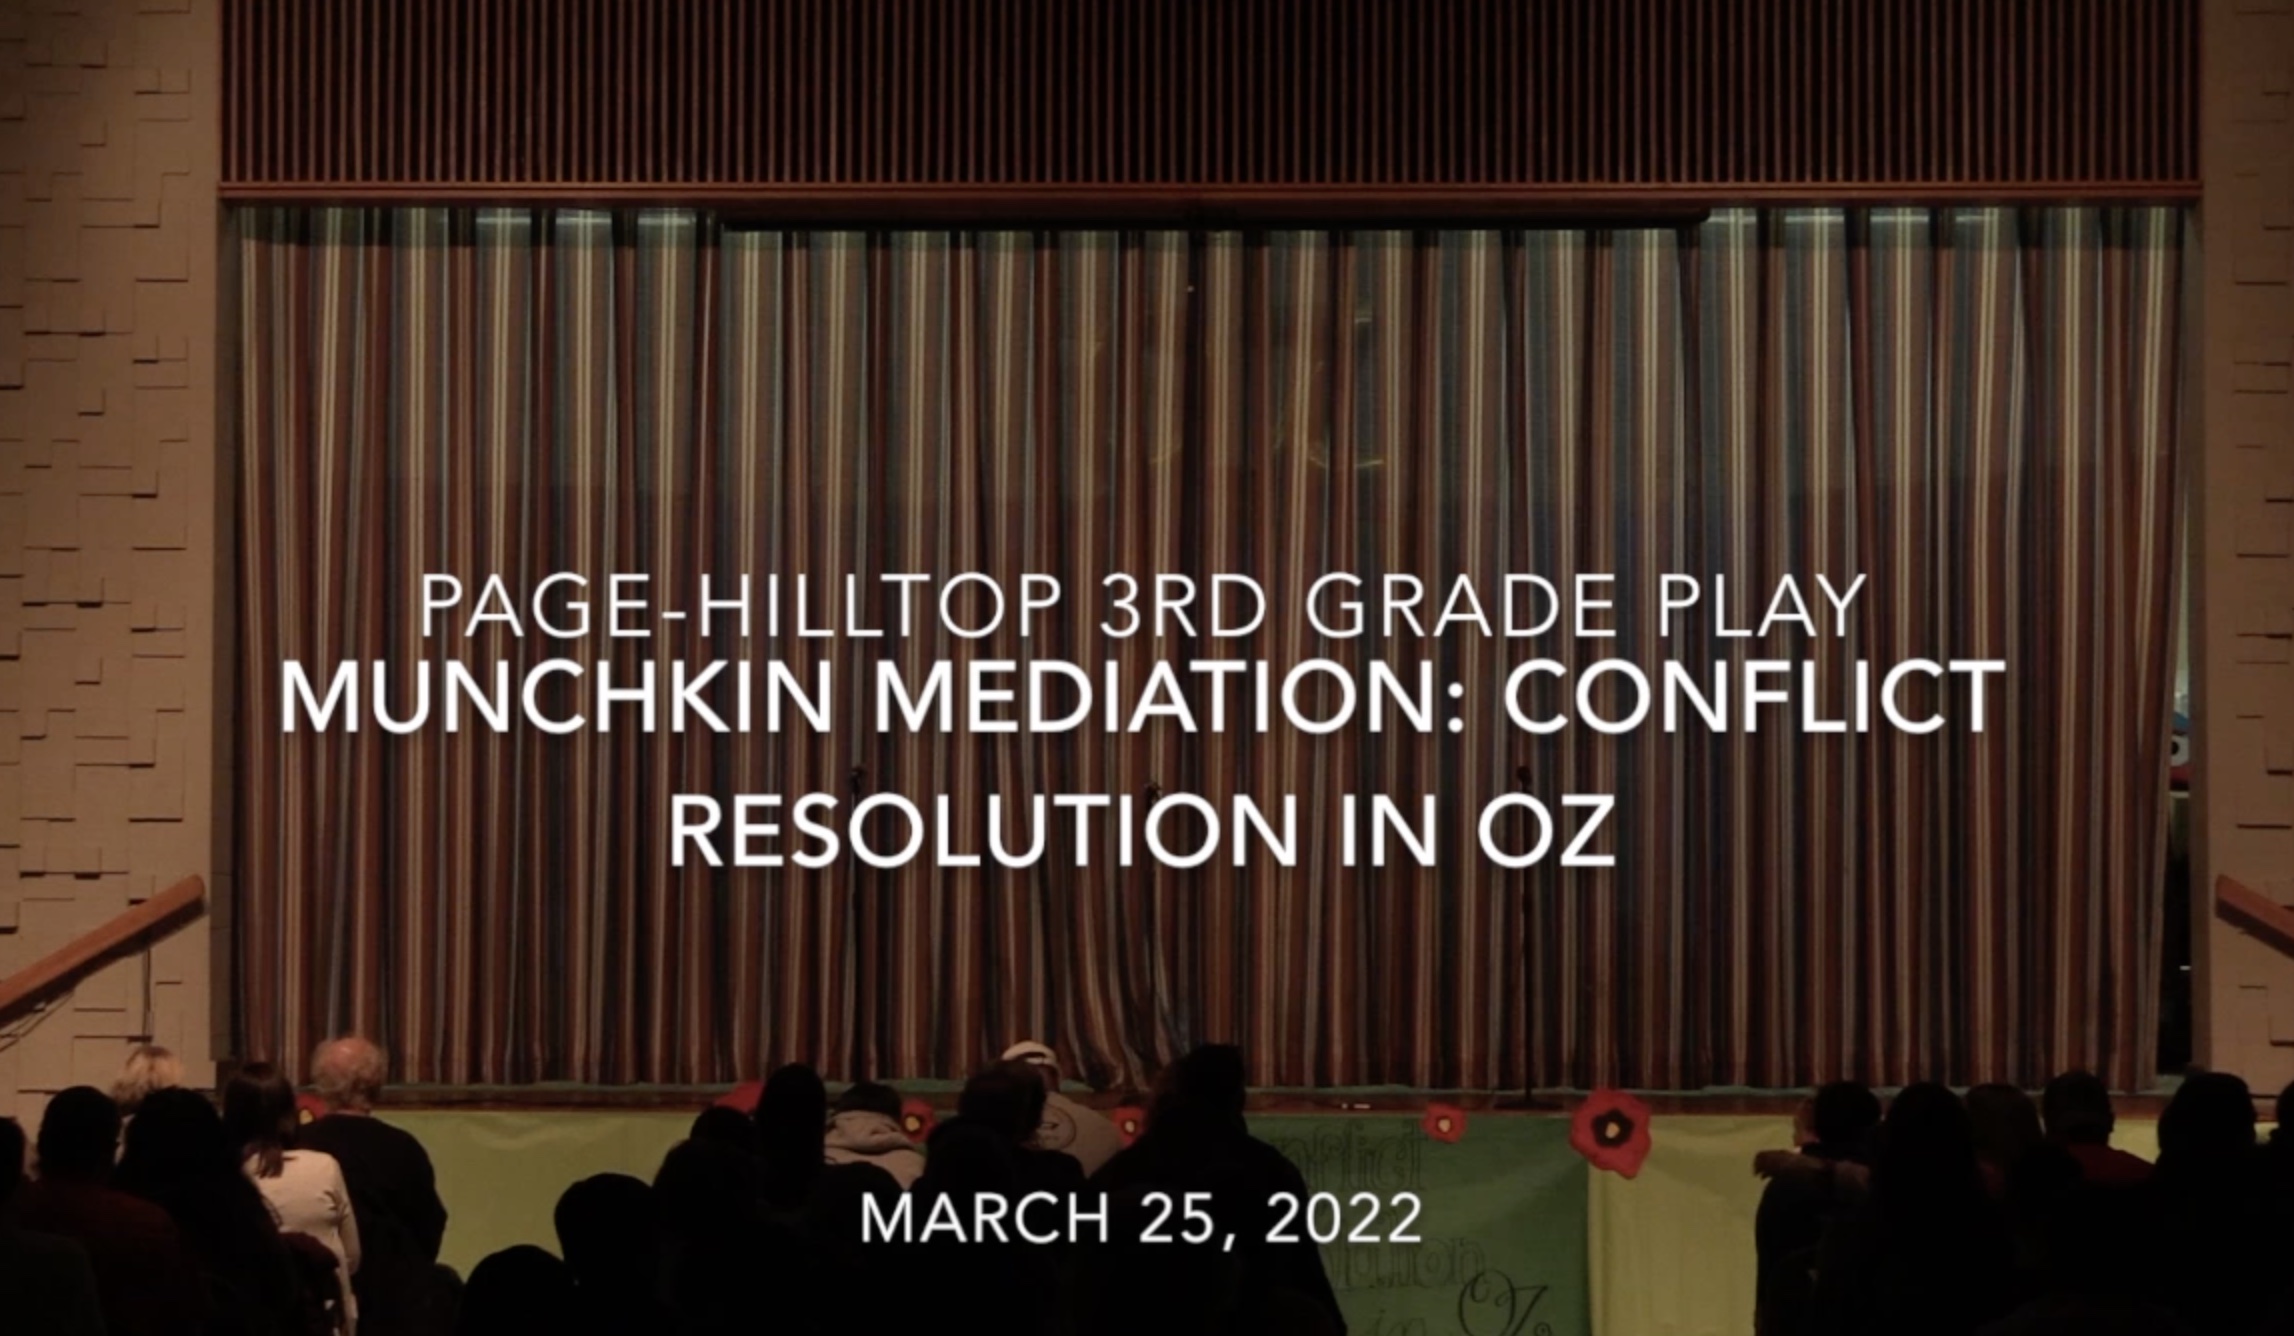 Page-hilltop 3rd Grade presents - Munchkin Mediation Conflict Resolution in OZ: March 25th, 2022